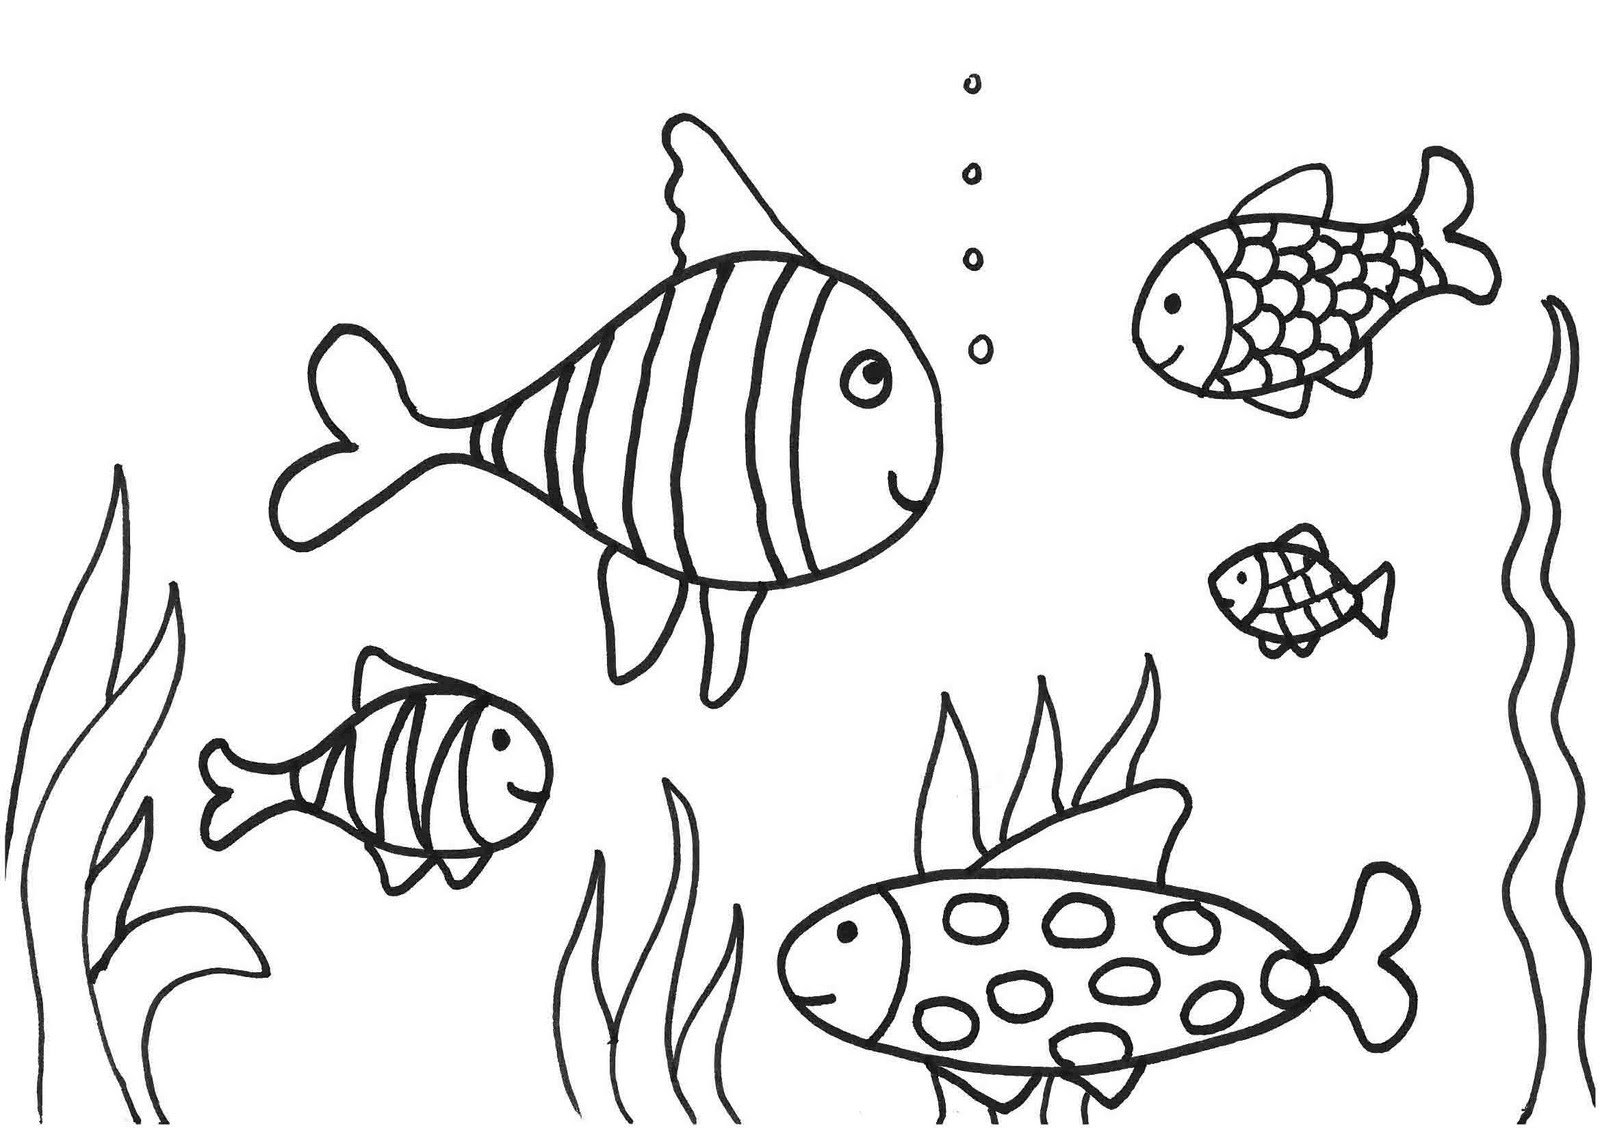 fish color 8 fish coloring pages jpg ai illustrator free color fish 